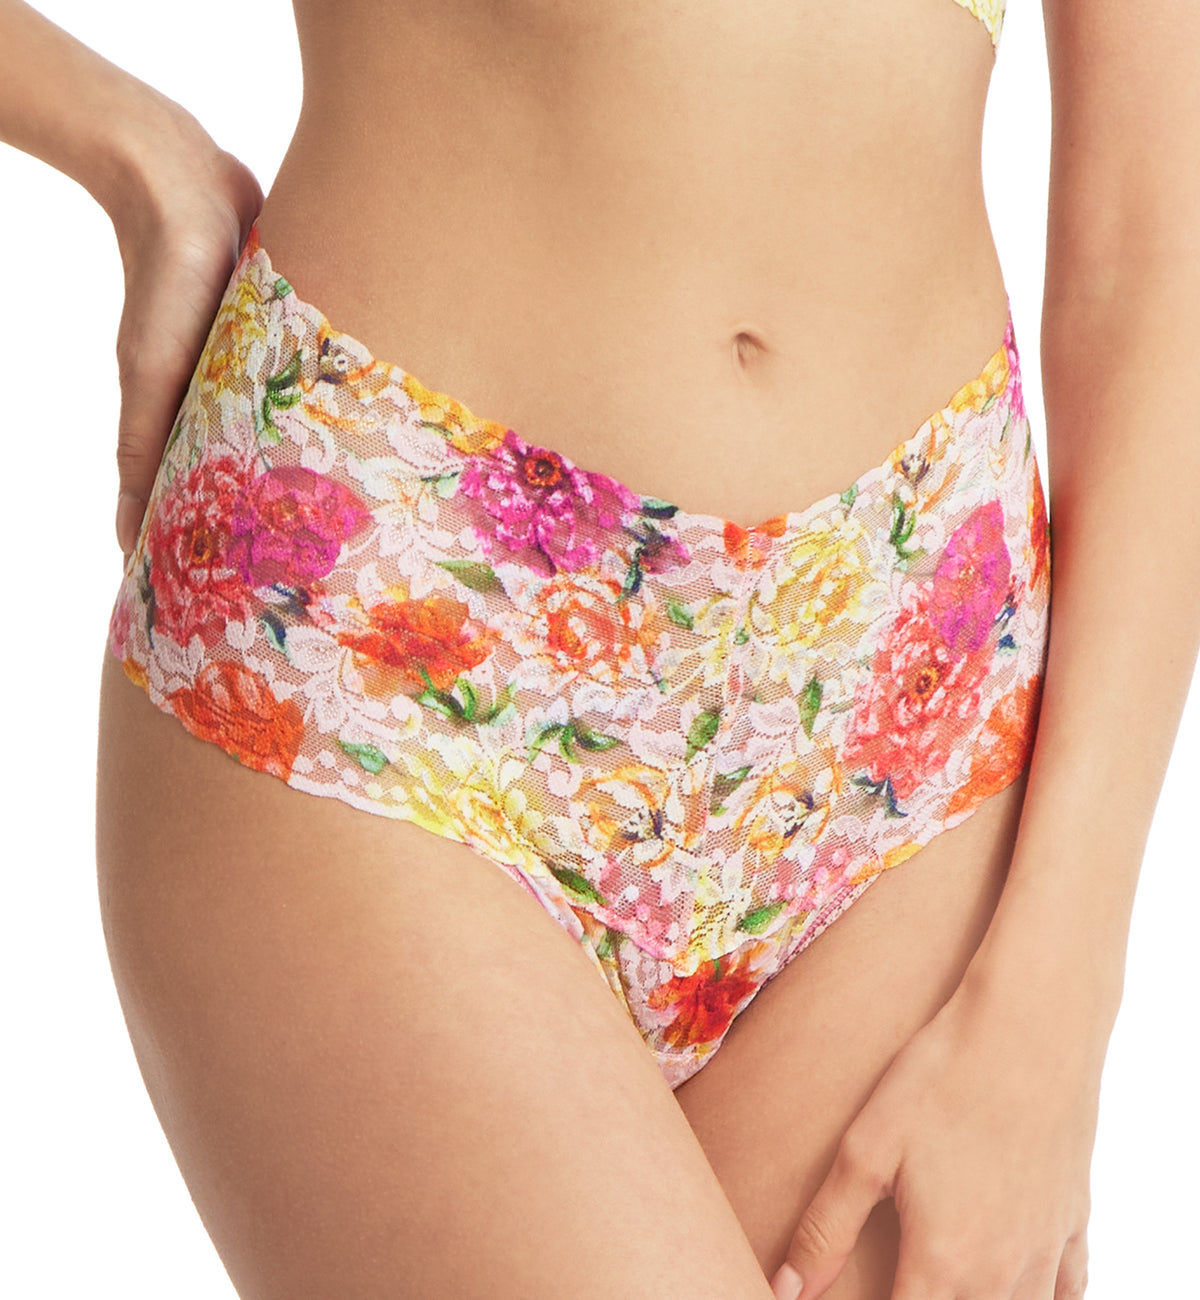 Hanky Panky High-Waist Retro Lace Printed Thong (PR9K1926),Bring Me Flowers - Bring Me Flowers,One Size